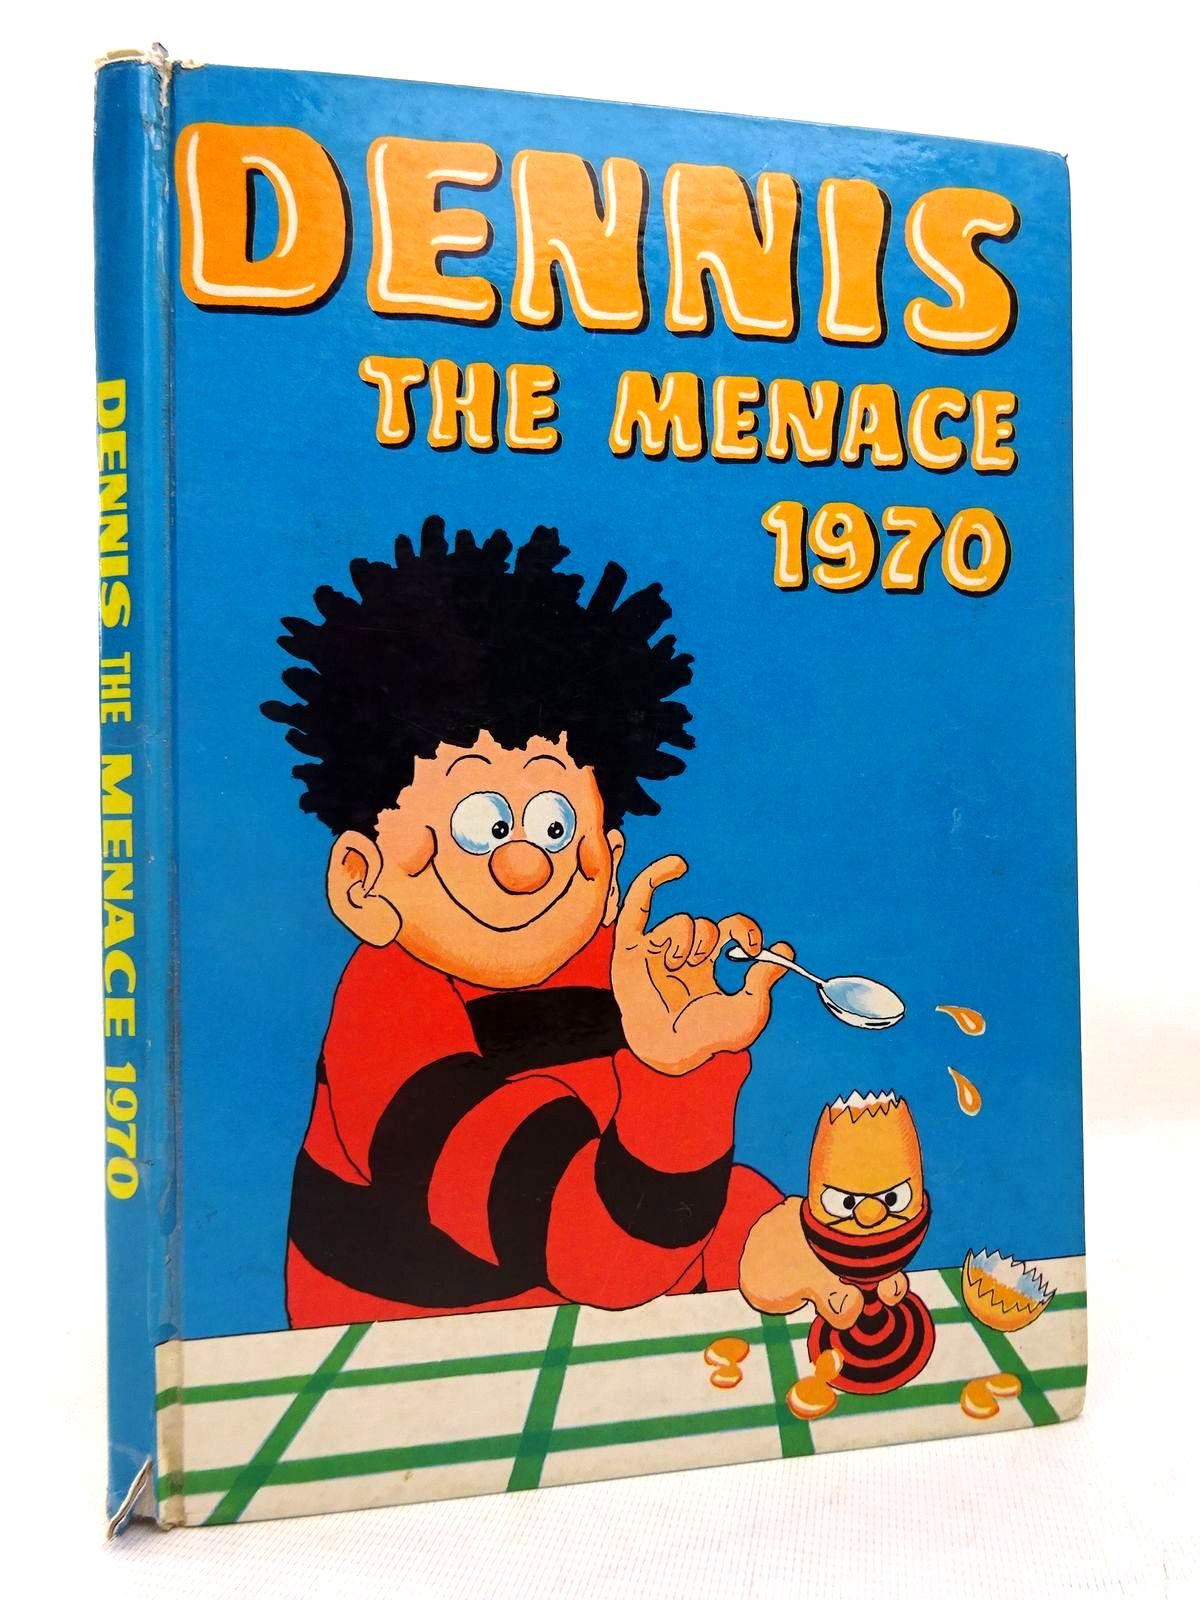 Photo of DENNIS THE MENACE 1970 published by D.C. Thomson & Co Ltd. (STOCK CODE: 1816395)  for sale by Stella & Rose's Books